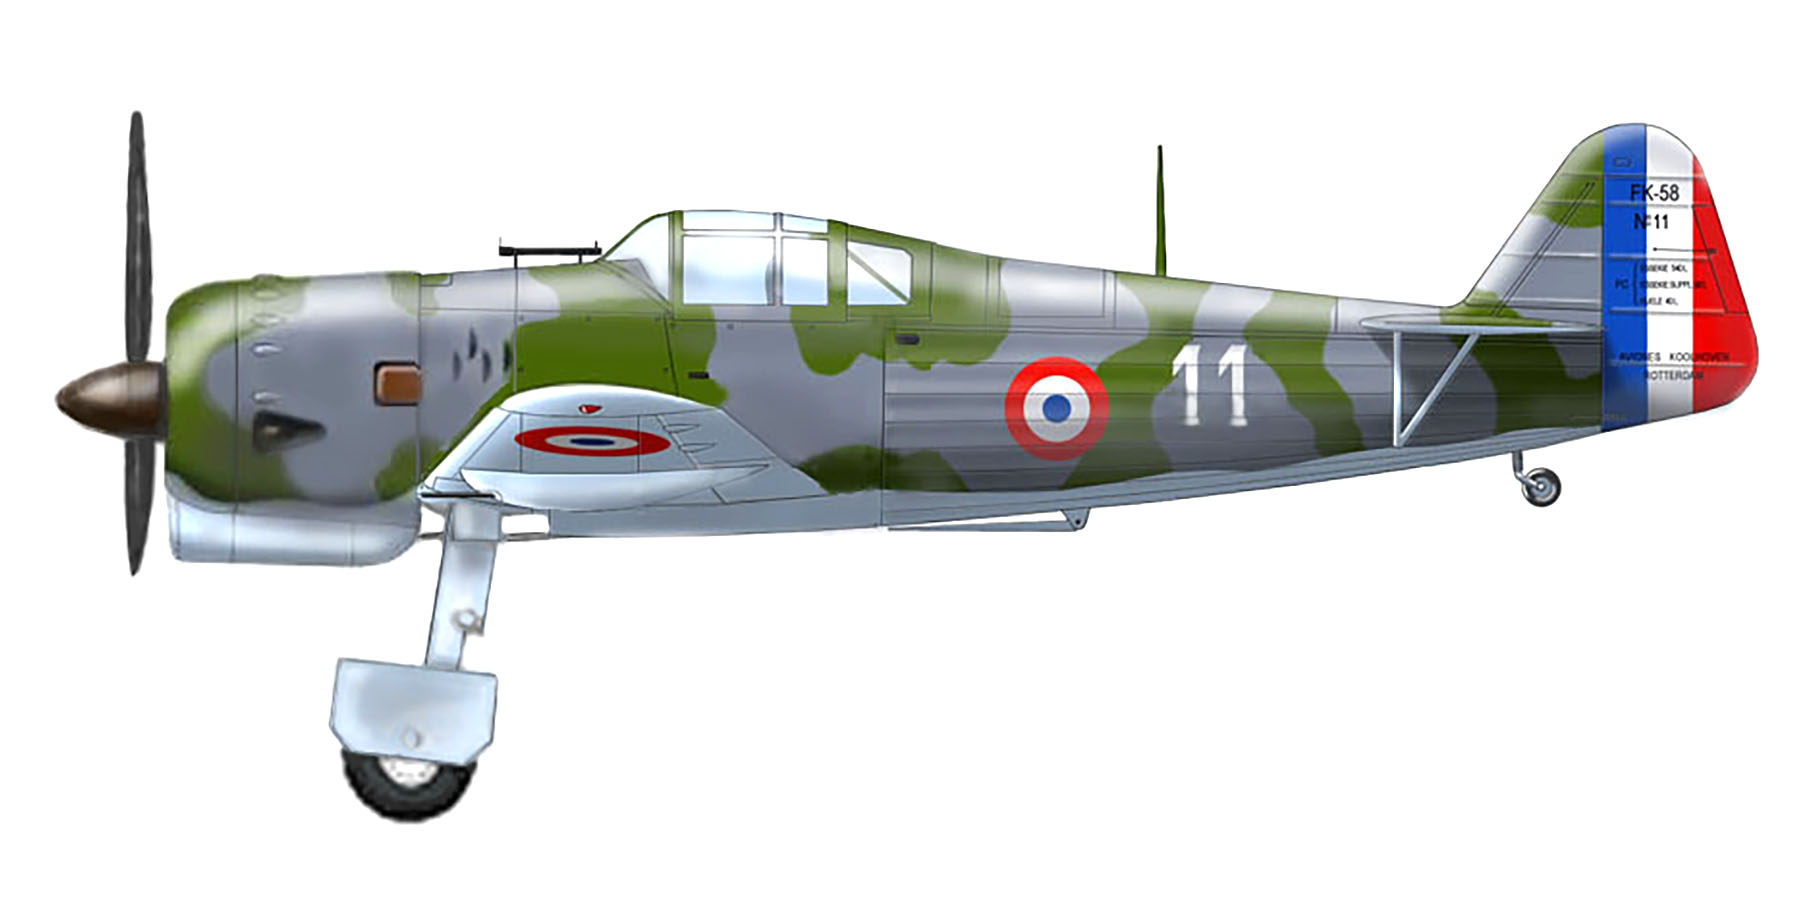 French Airforce Koolhoven FK58 White 11 powered by Gnome Rhone 14N 49 engine France 1940 0A